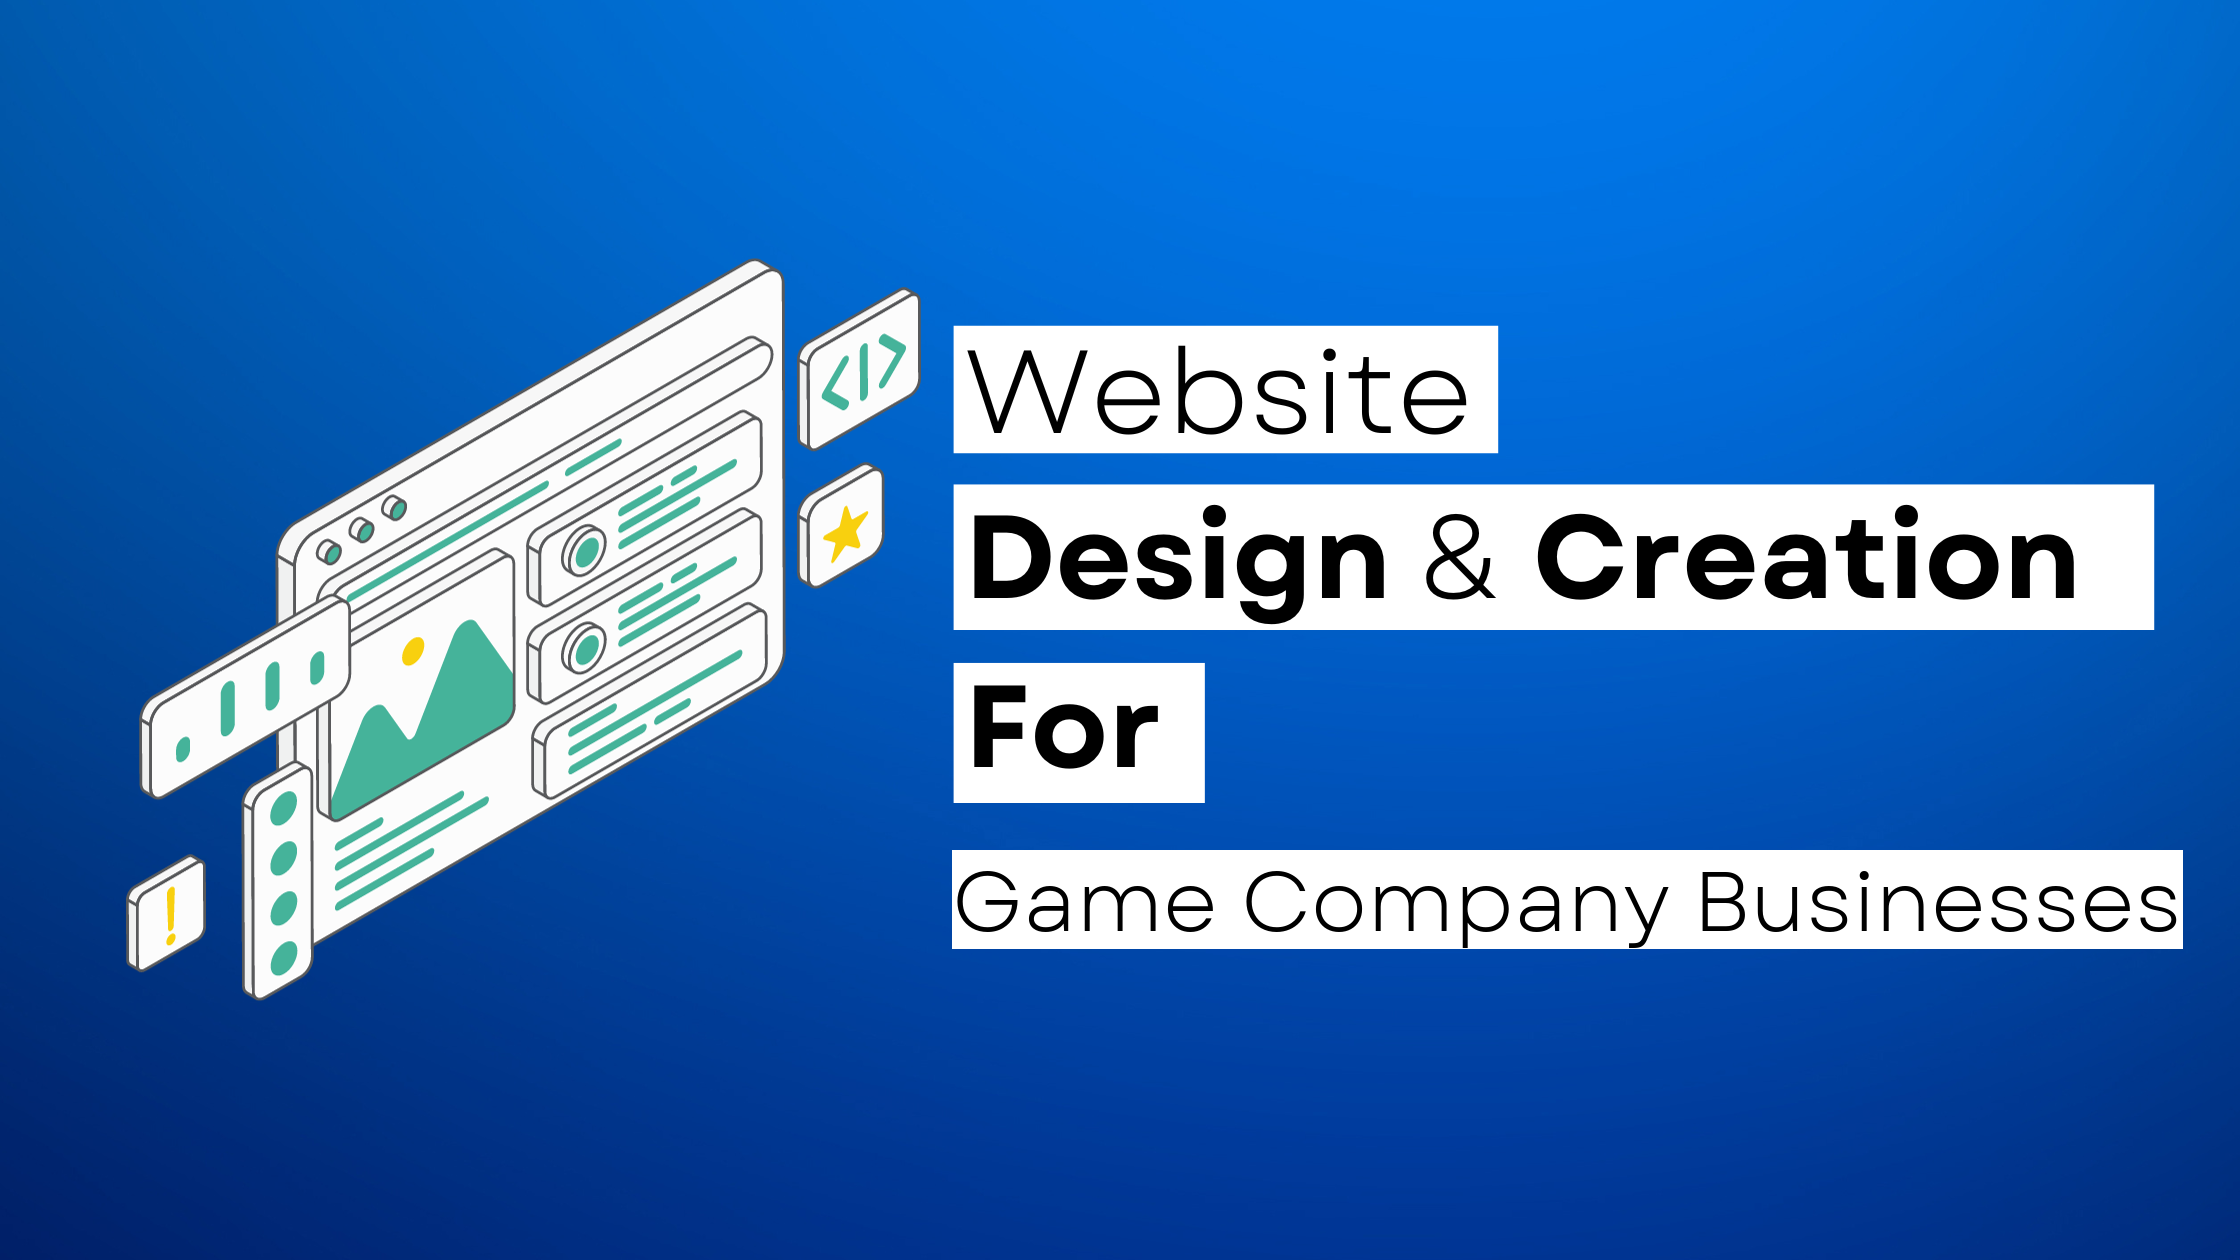 How to start a Game Company website